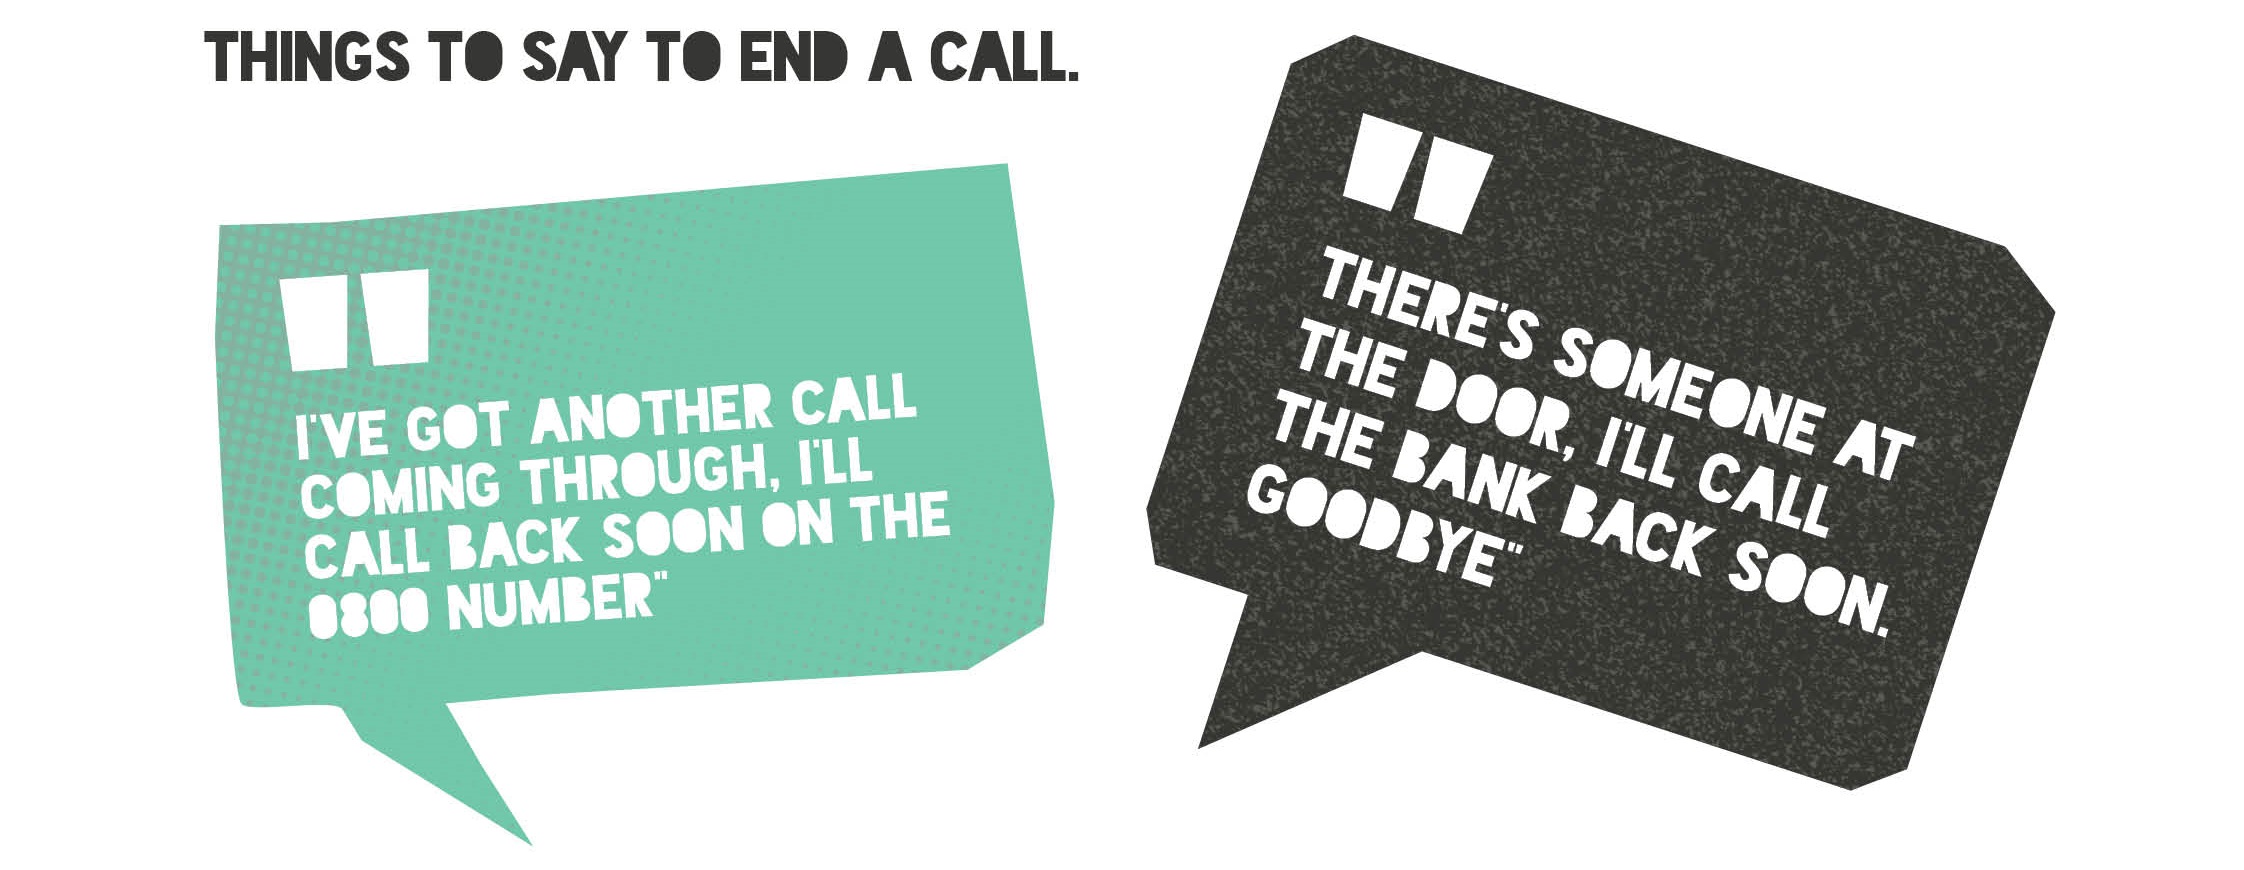 Image with 2 speech bubbles suggesting 2 things you can say to help end a call. 1. “I’ve got another call coming through. I’ll call back soon on the 0800 number” and 2. “There’s someone at the door. I’ll call the bank back soon. Goodbye."